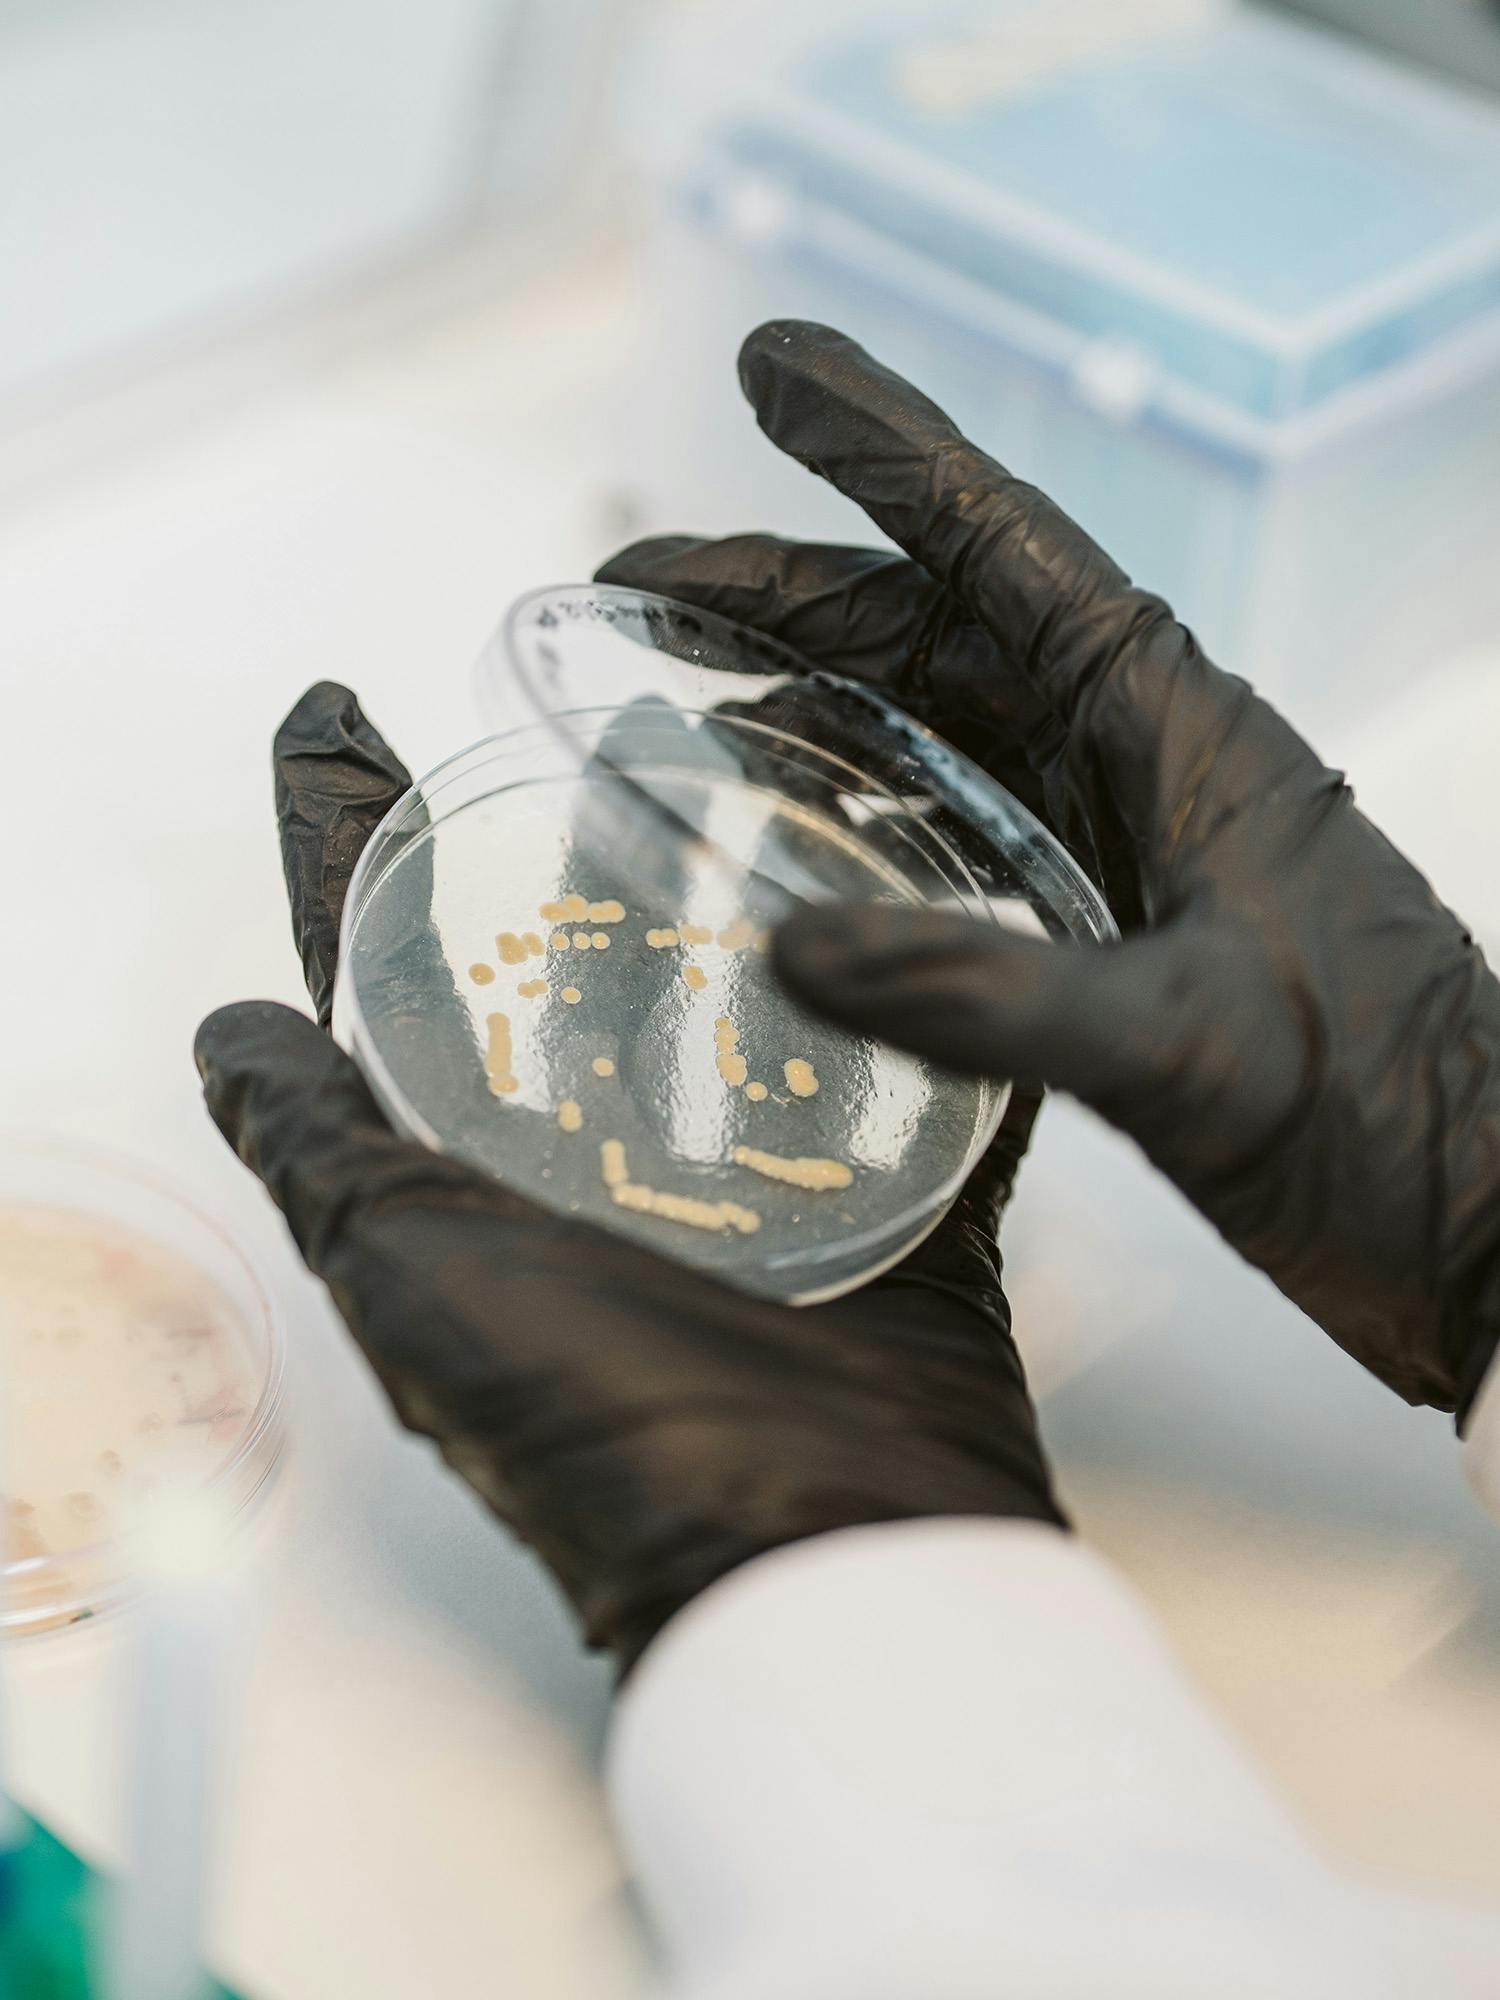 Bacteria growing in a petri dish to be used for making biomaterials